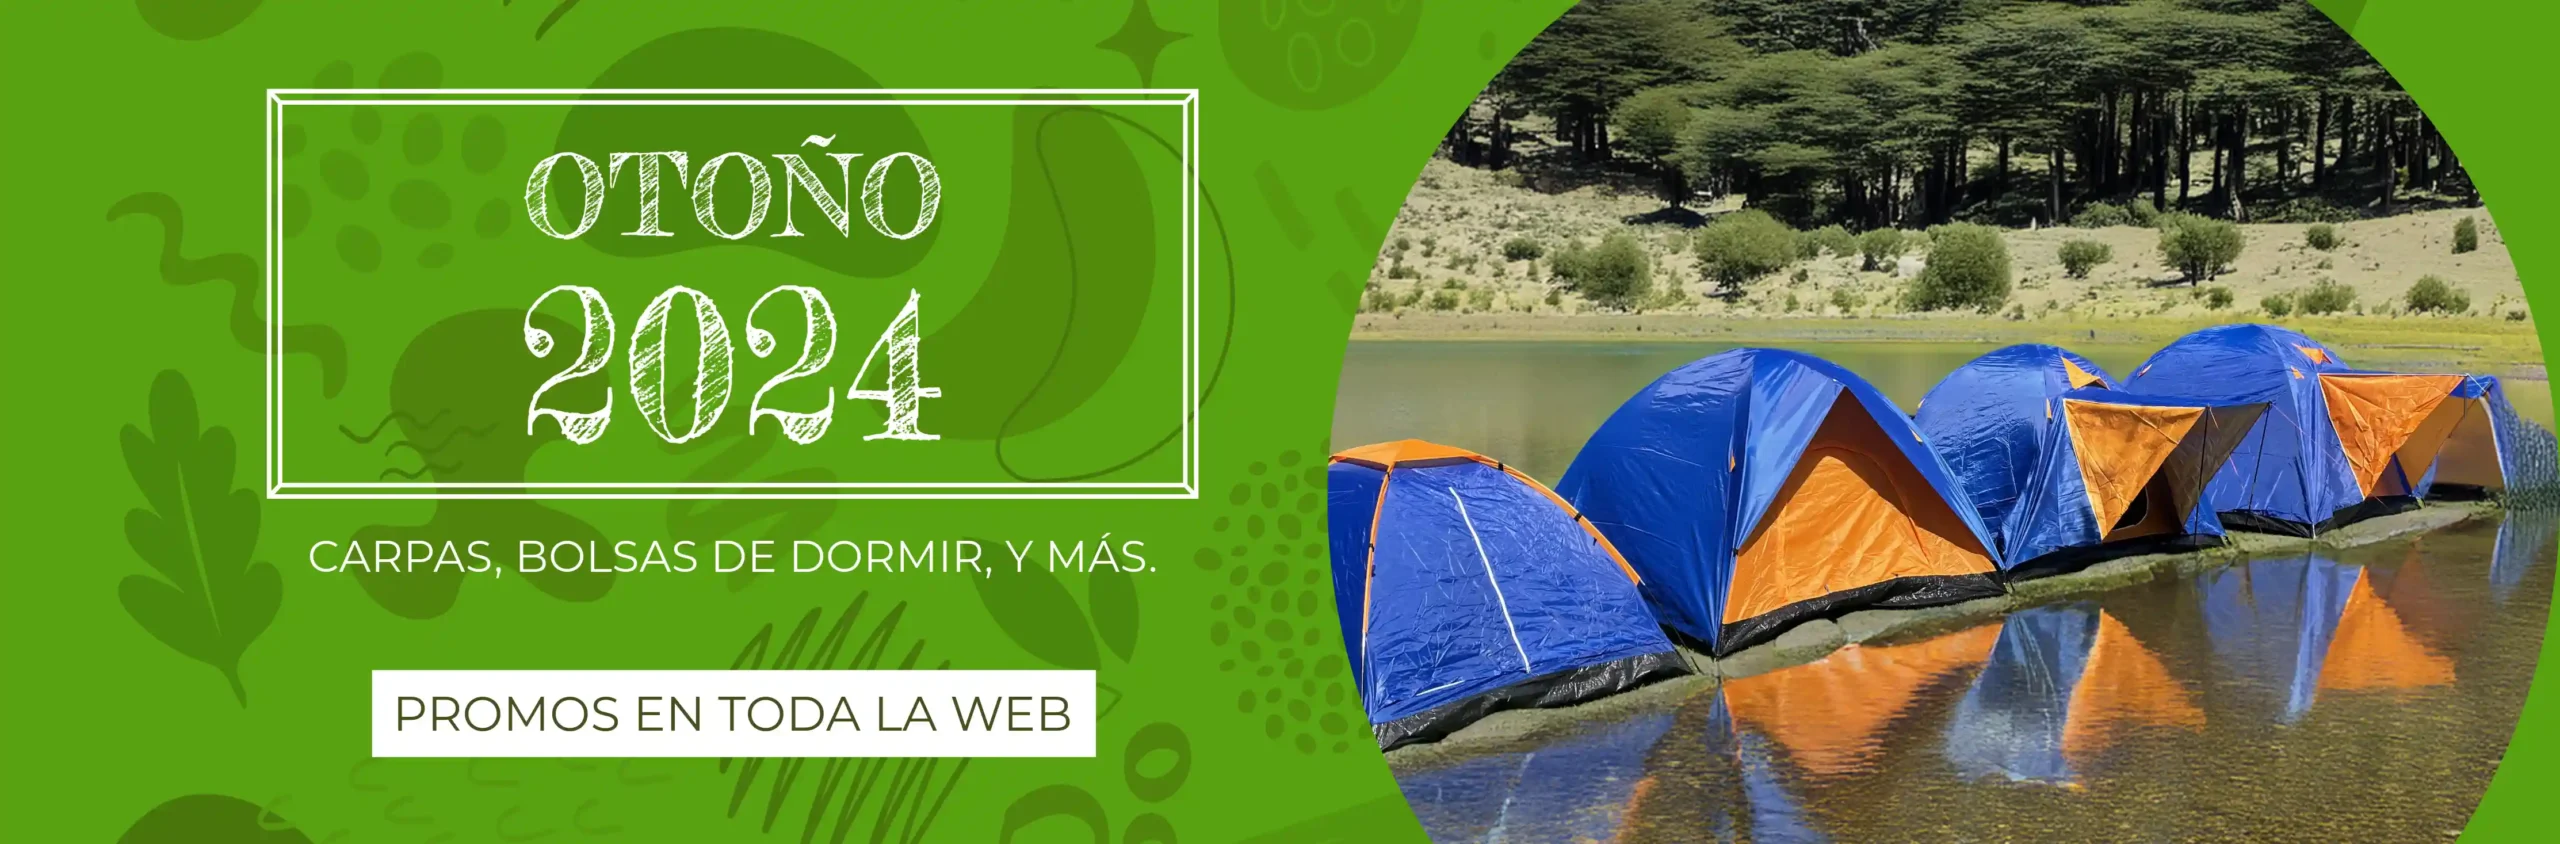 camping banner 1